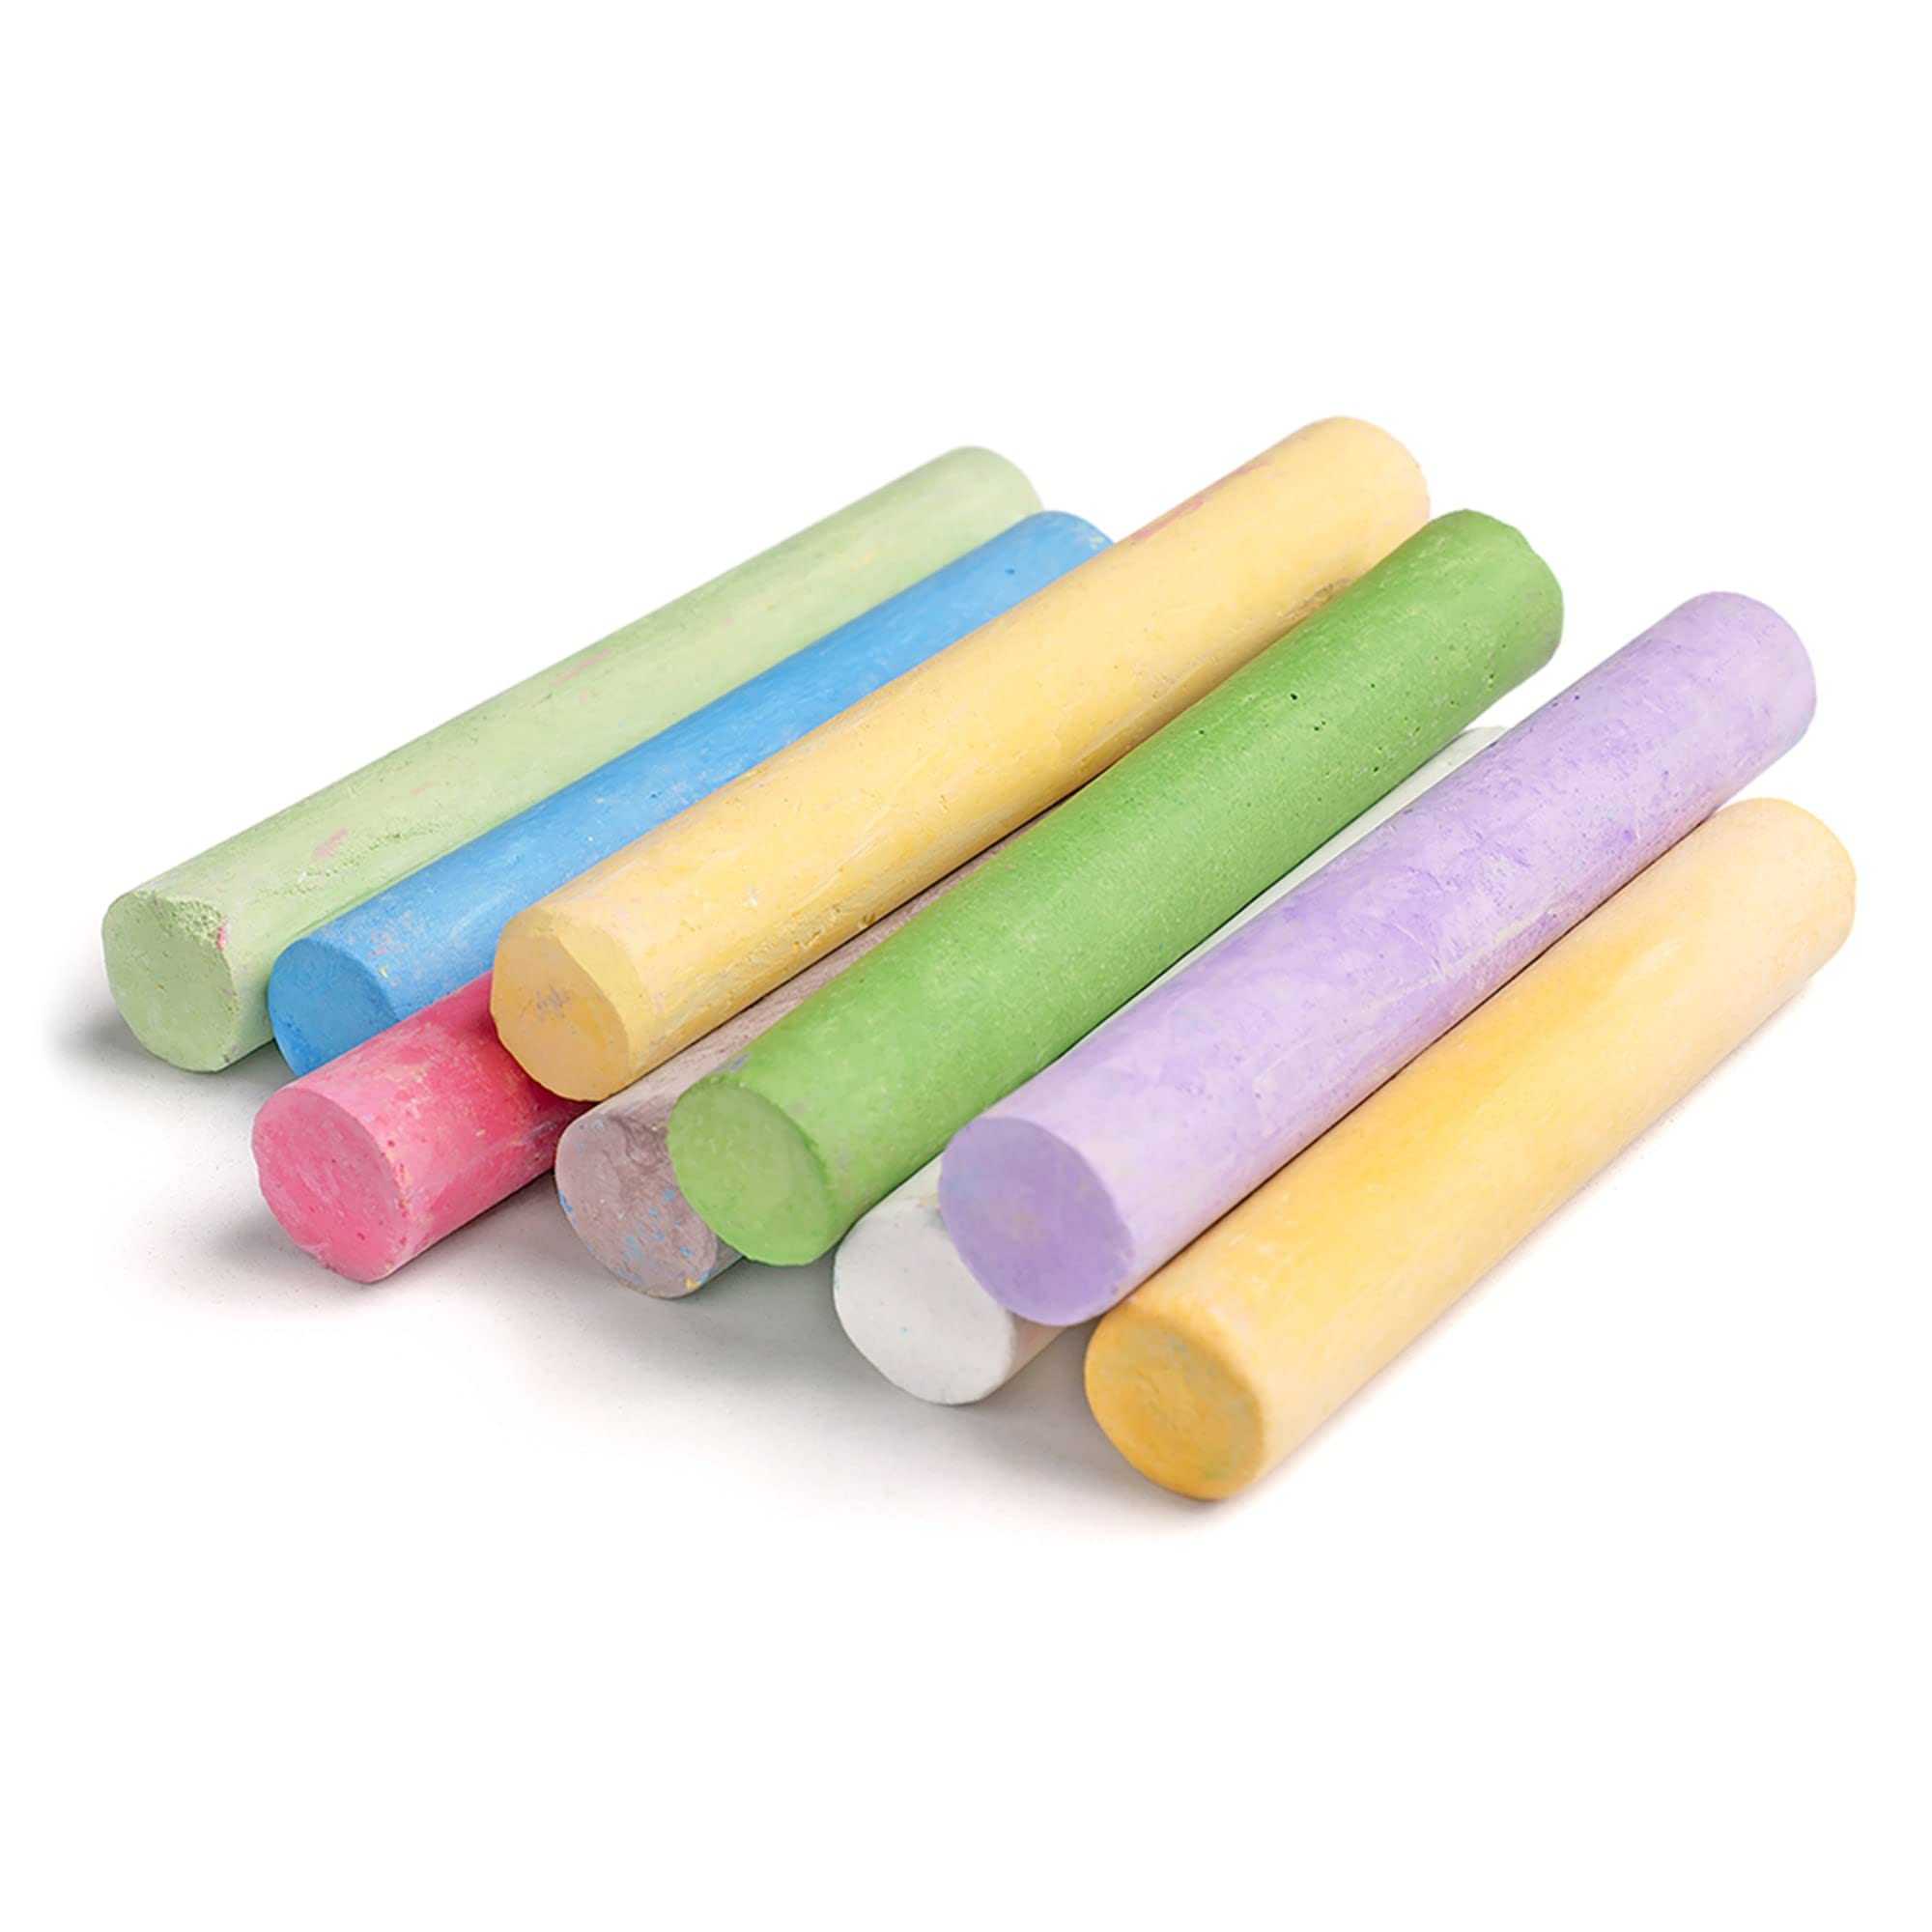 Cra-Z-Art Colored Chalk, 16 Count (10801-48) , Assorted